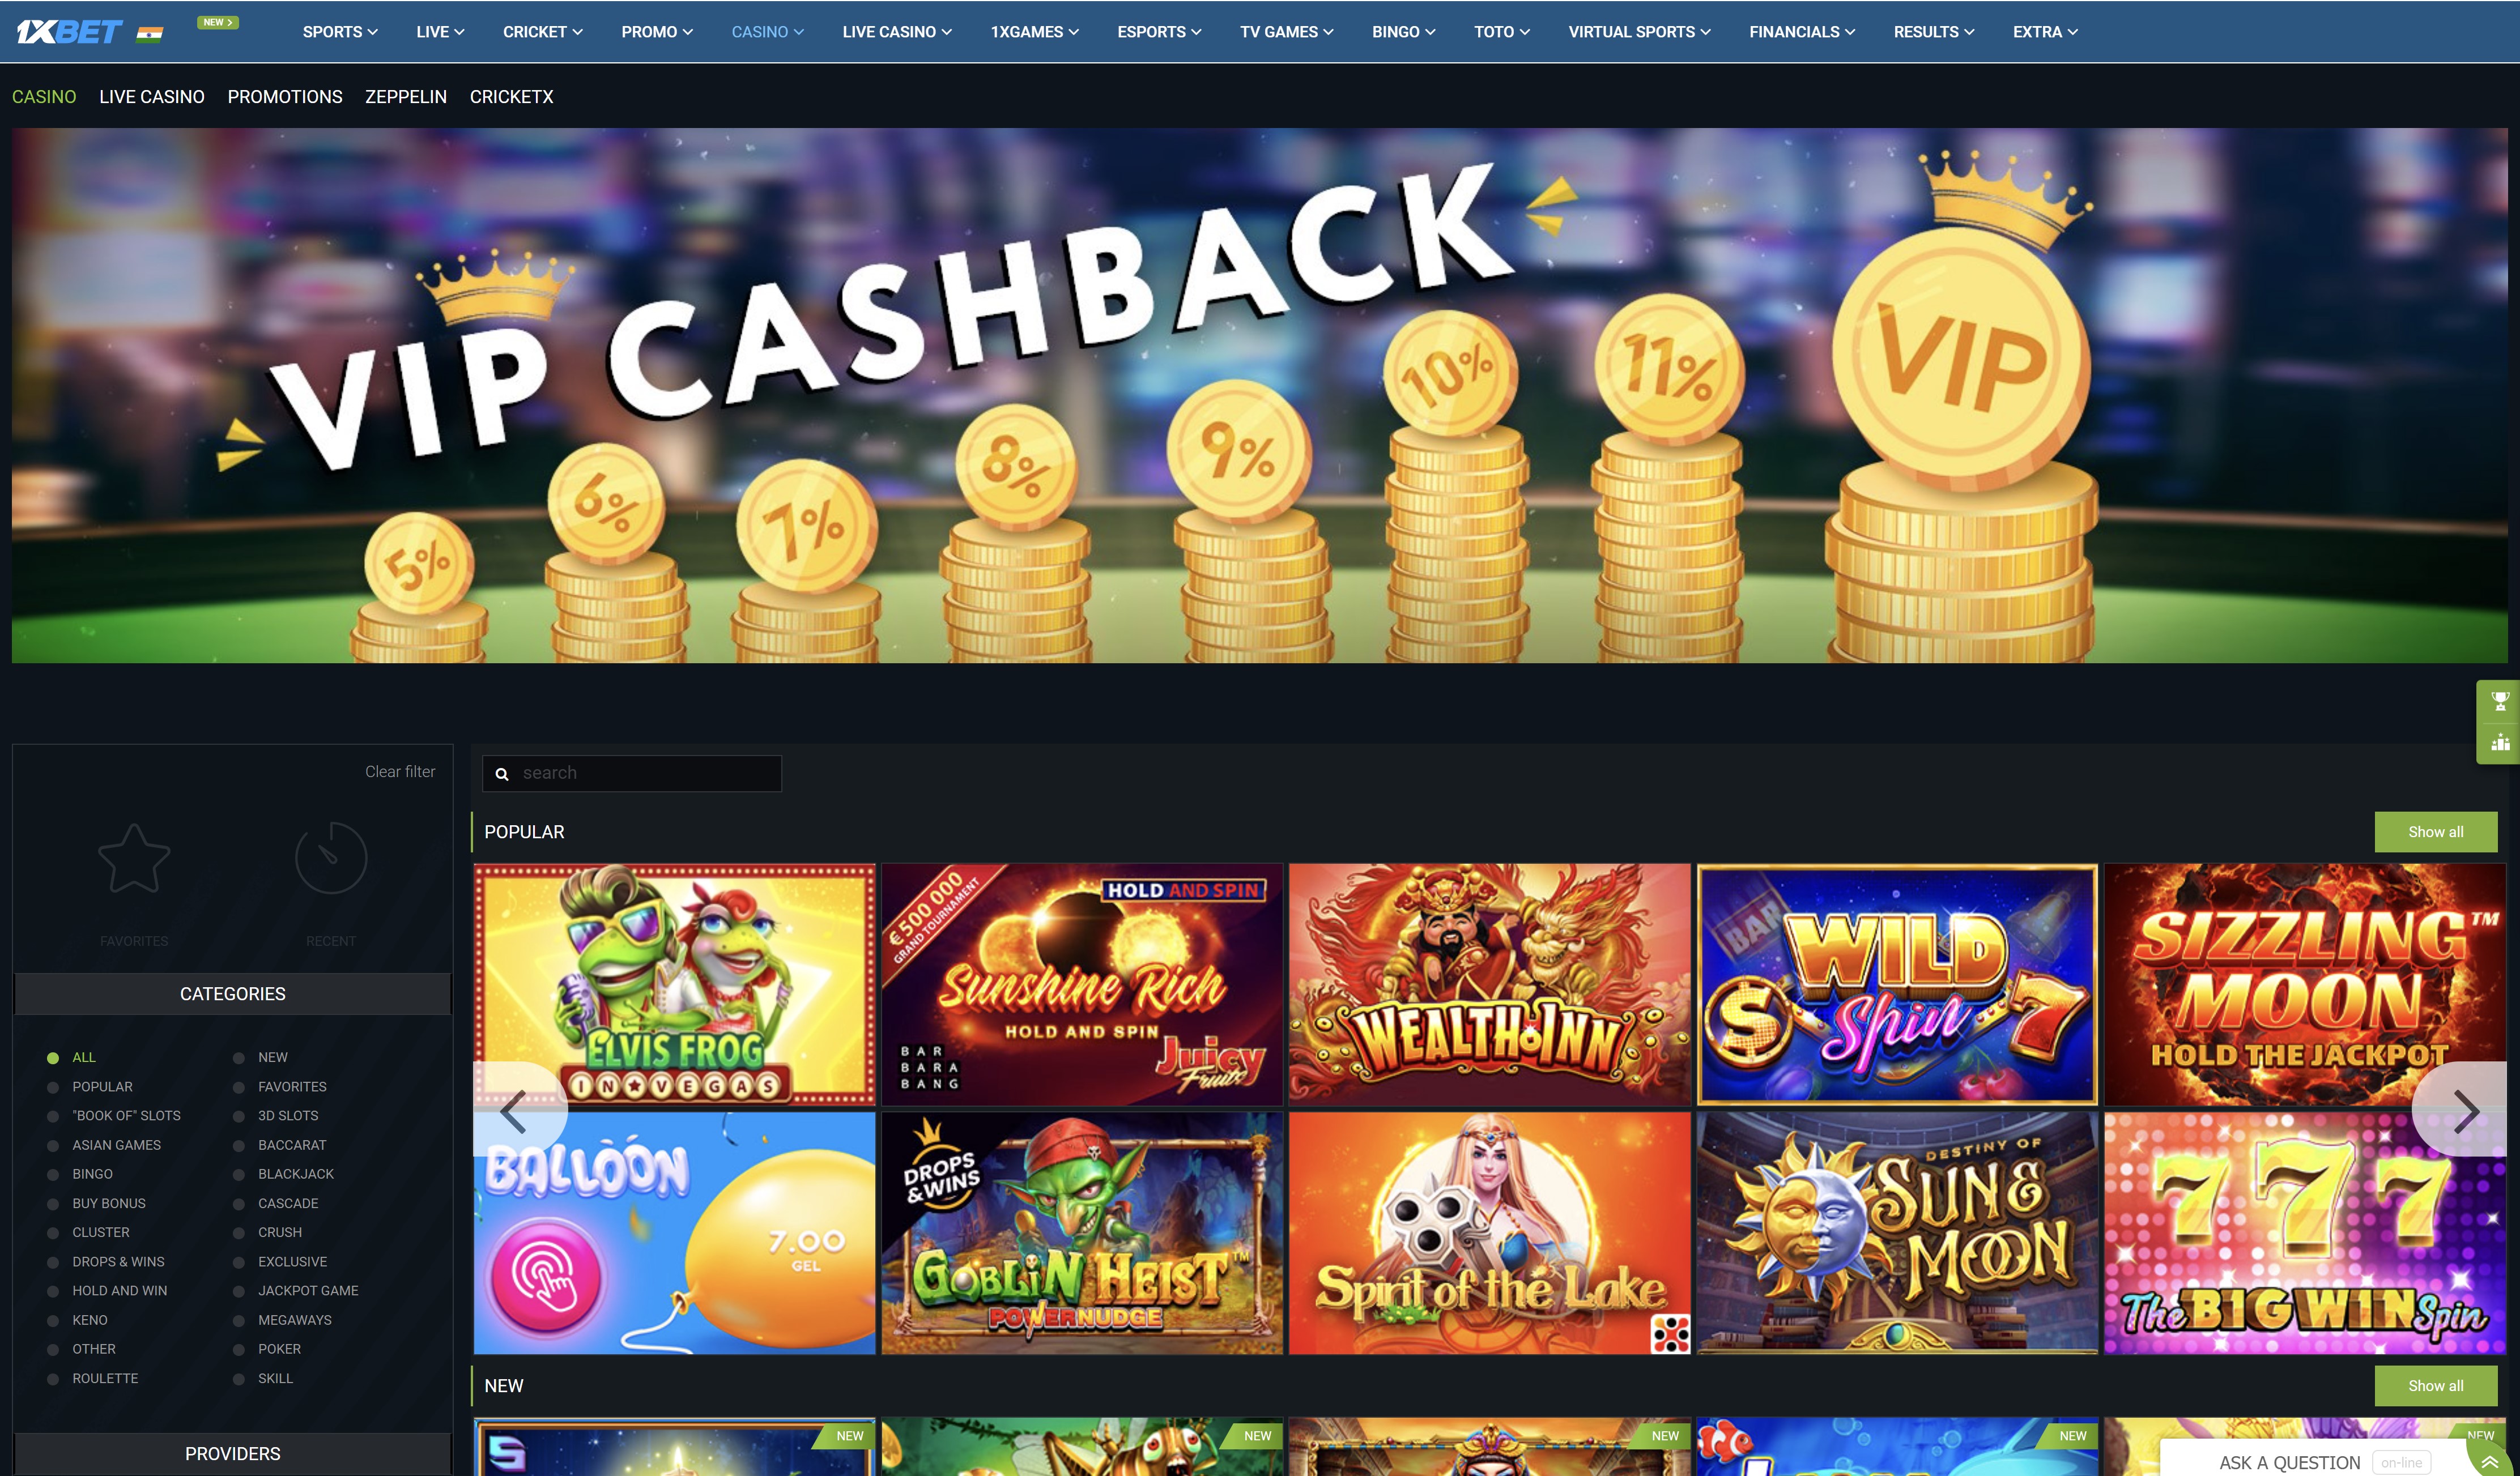 1xbet Casino Review - Play Great Games with Large Bonuses